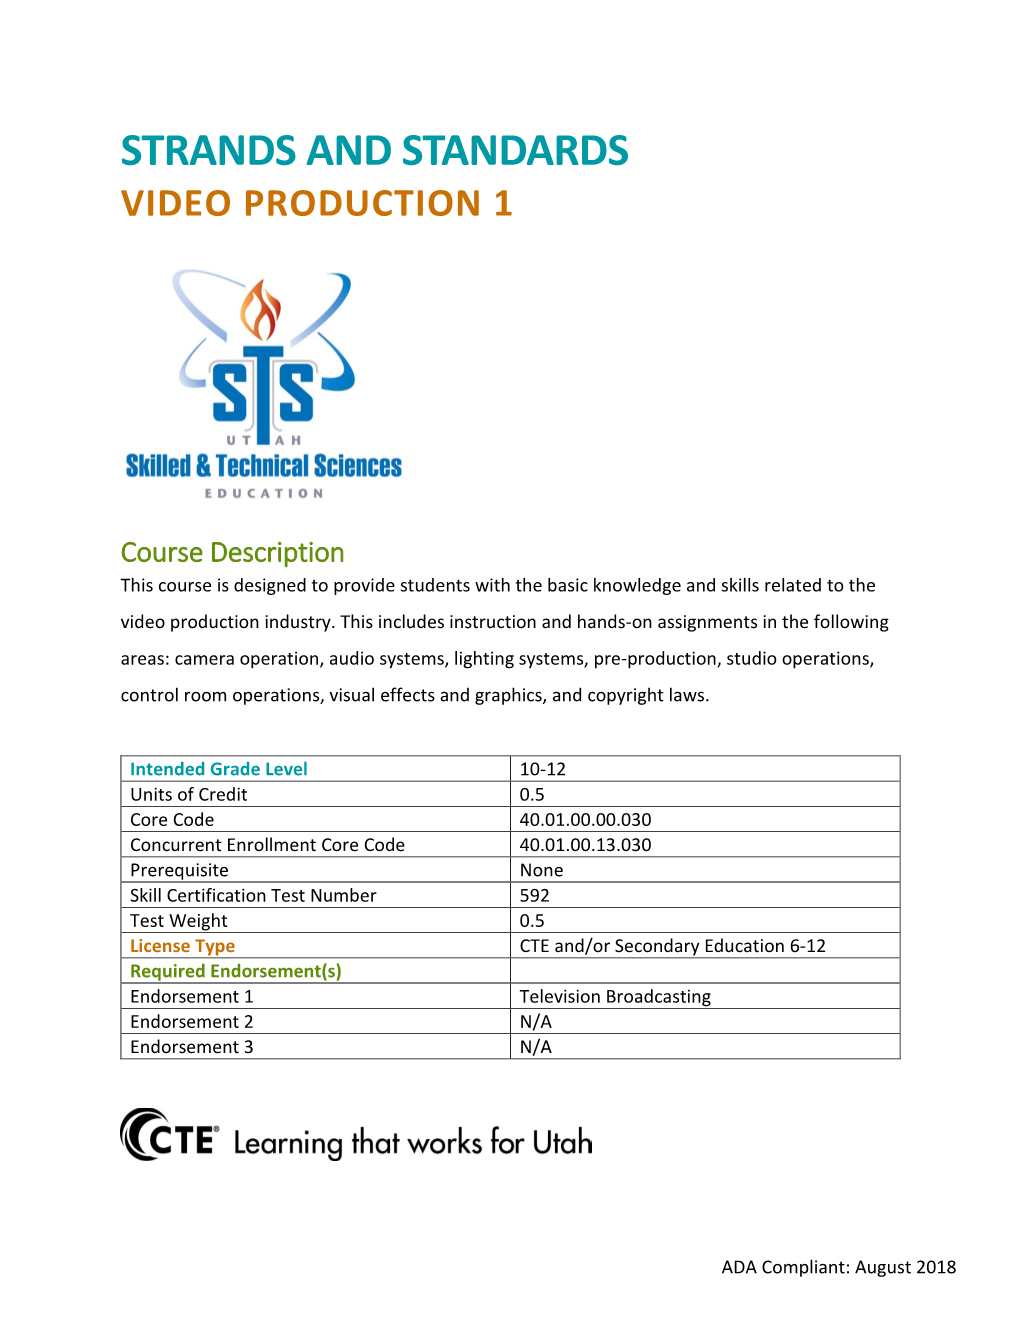 Strands and Standards Video Production 1